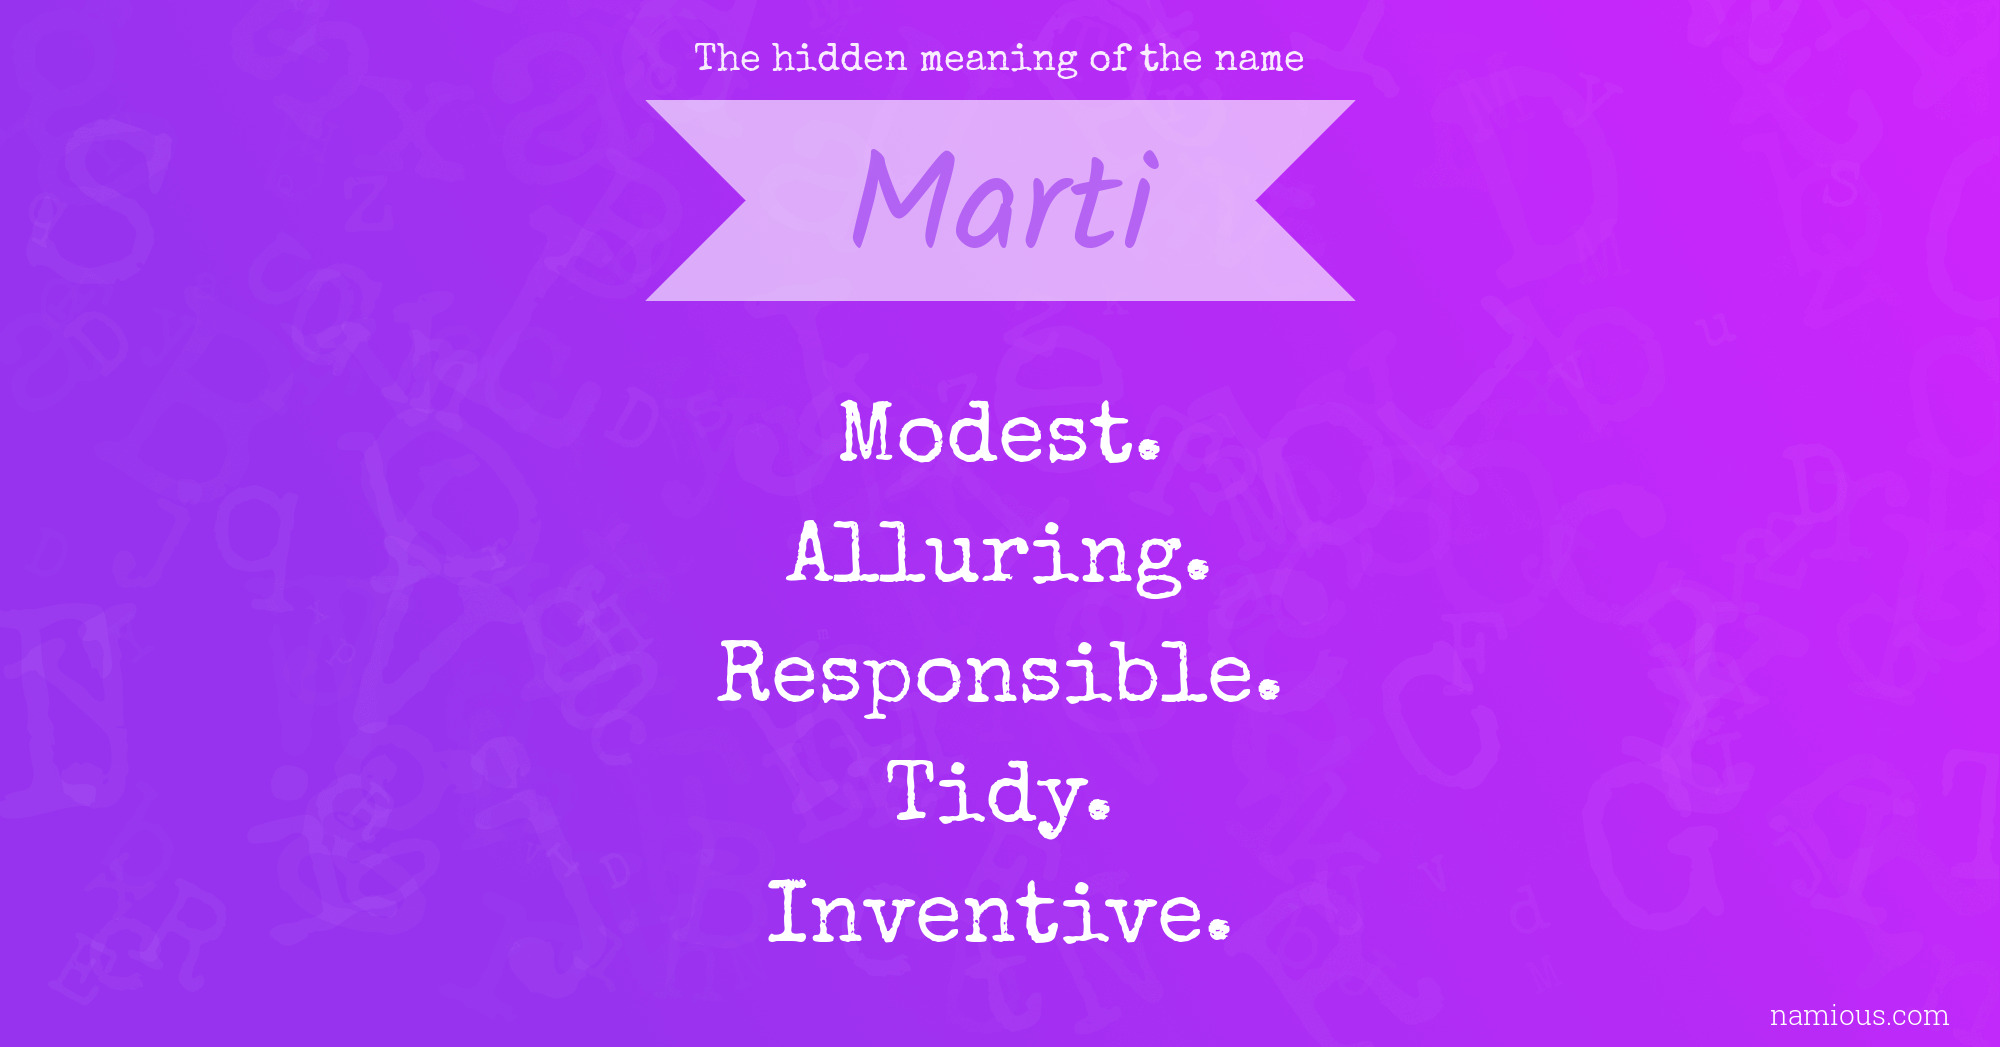 The hidden meaning of the name Marti